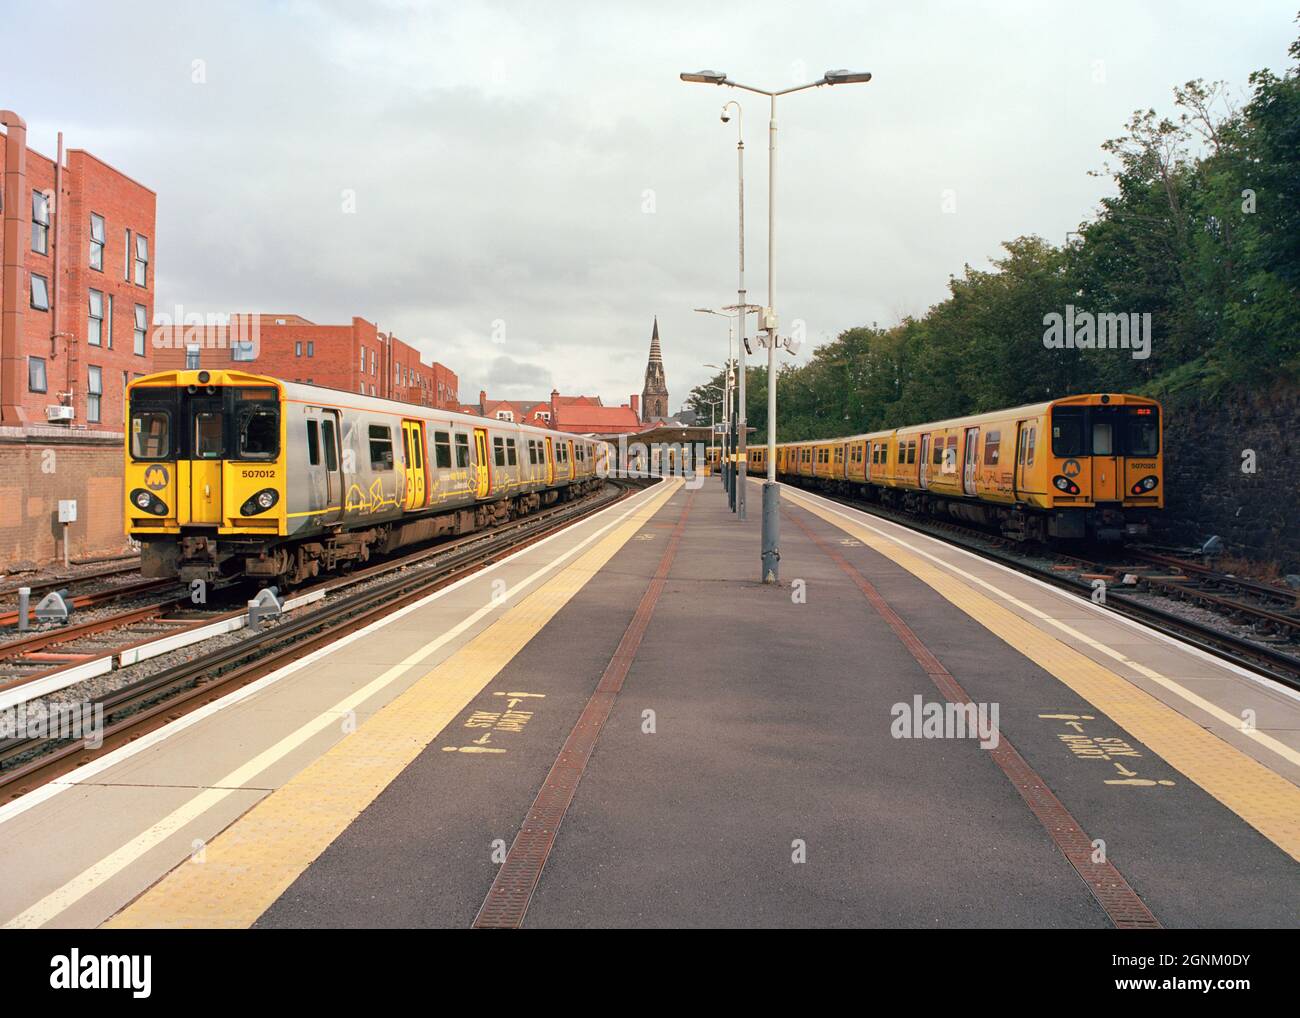 New Brighton, UK - 11 September 2021: The Merseyrail electric trains (Class 507) at the sidings of New Brighton station. Stock Photo